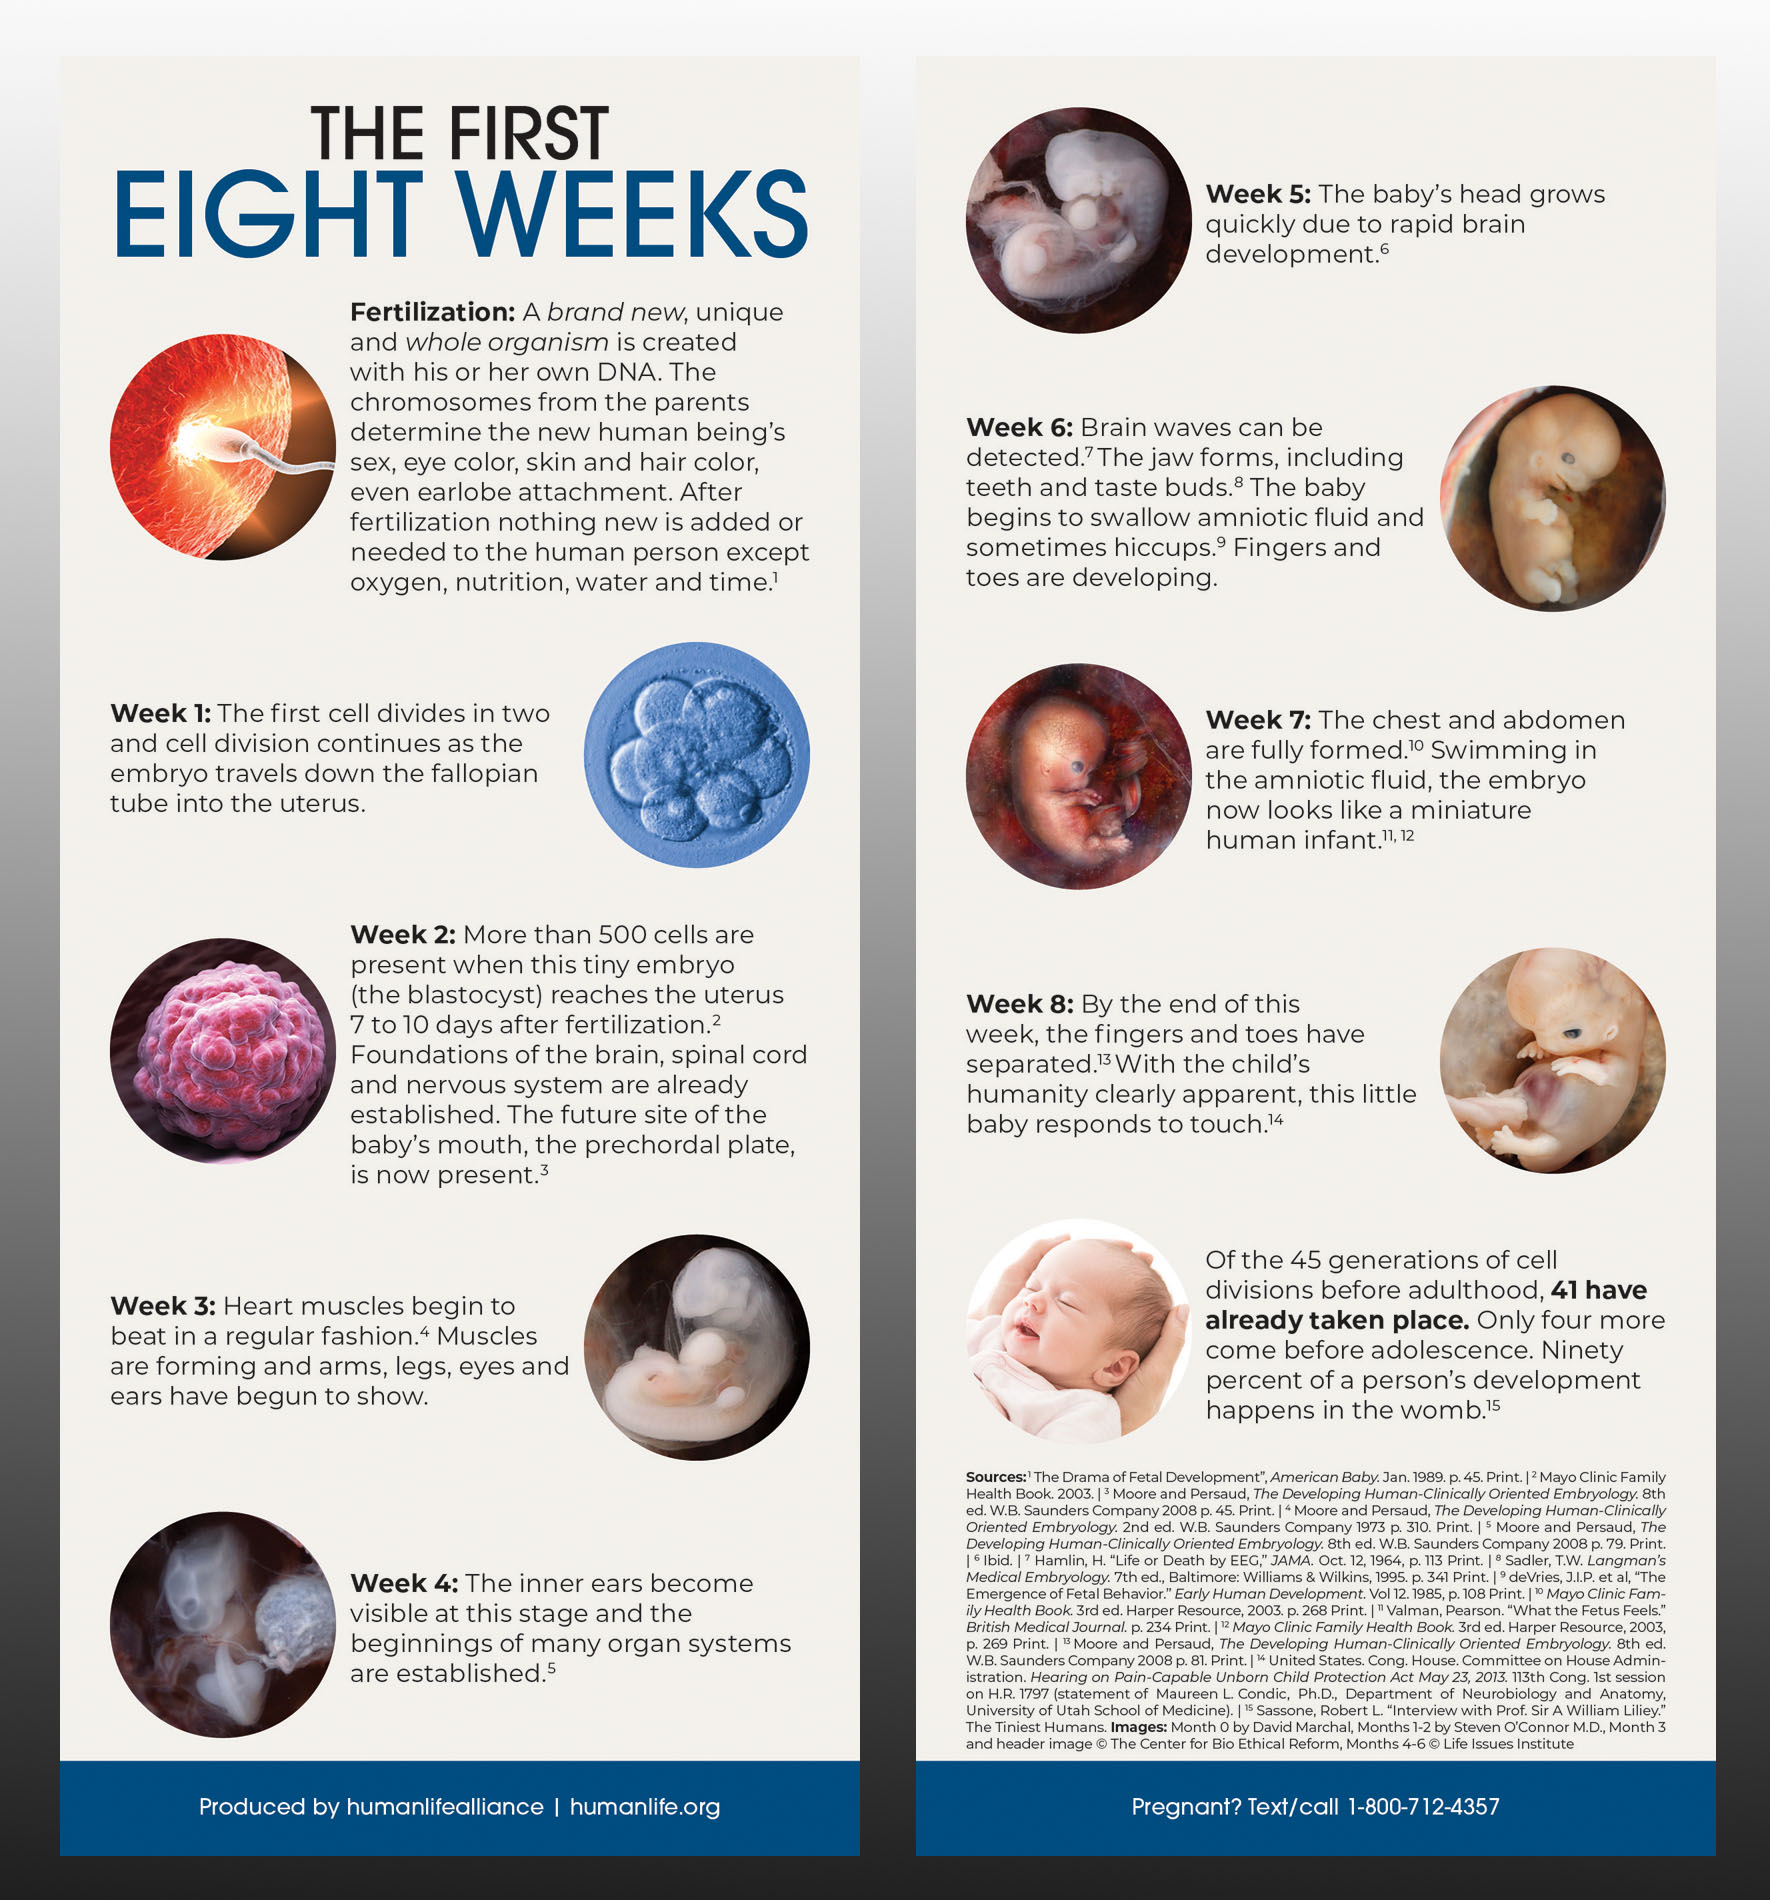 First Eight Weeks Fact Card